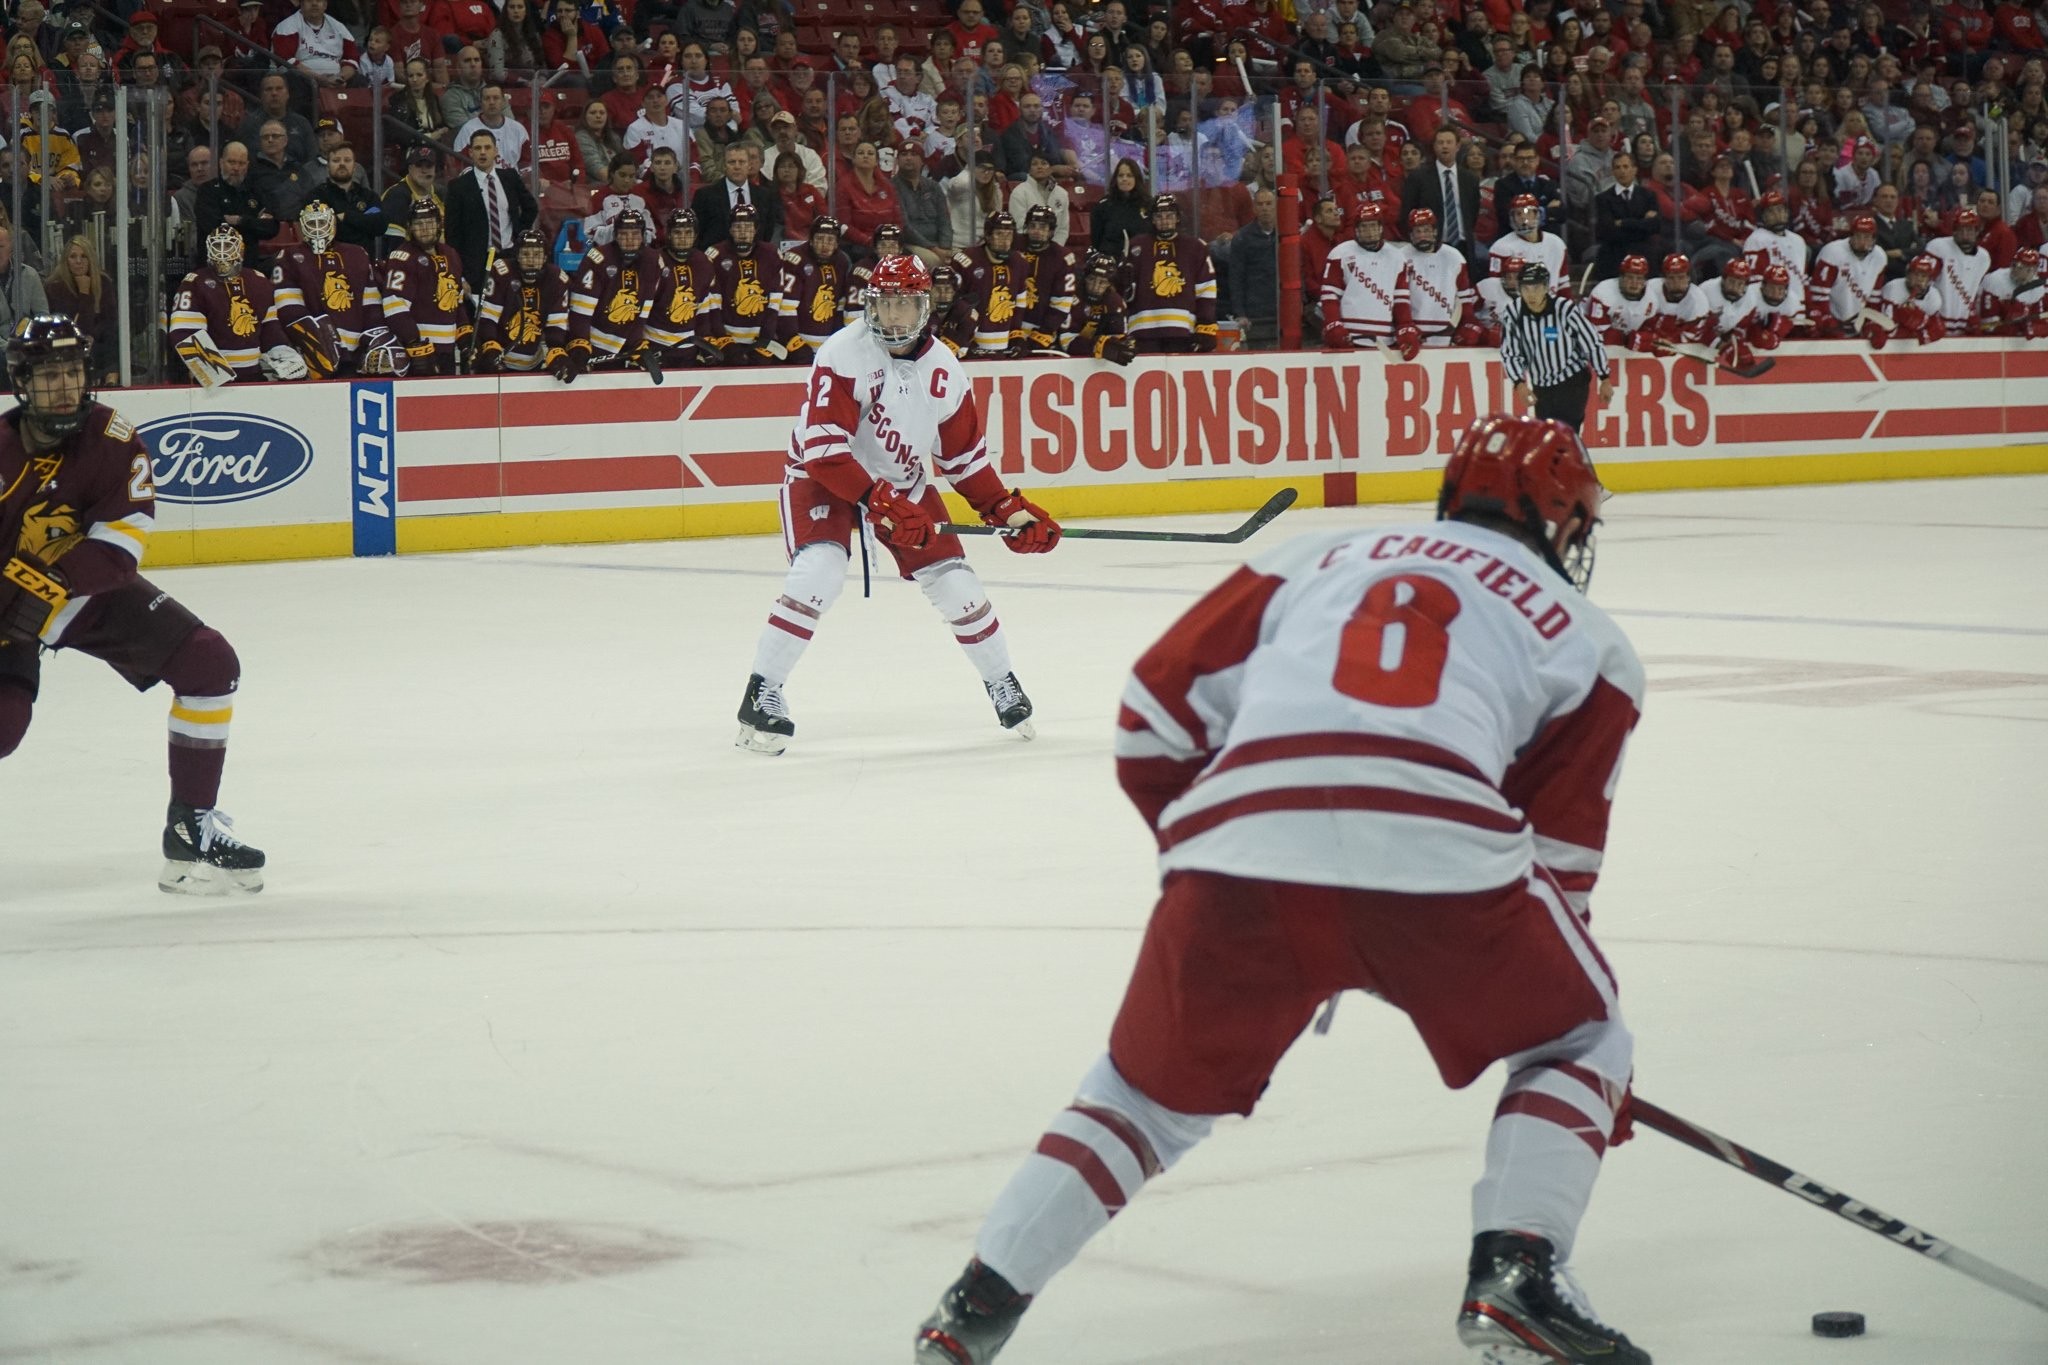 Men’s Hockey Border battle opportunity for Badgers, Gophers to find